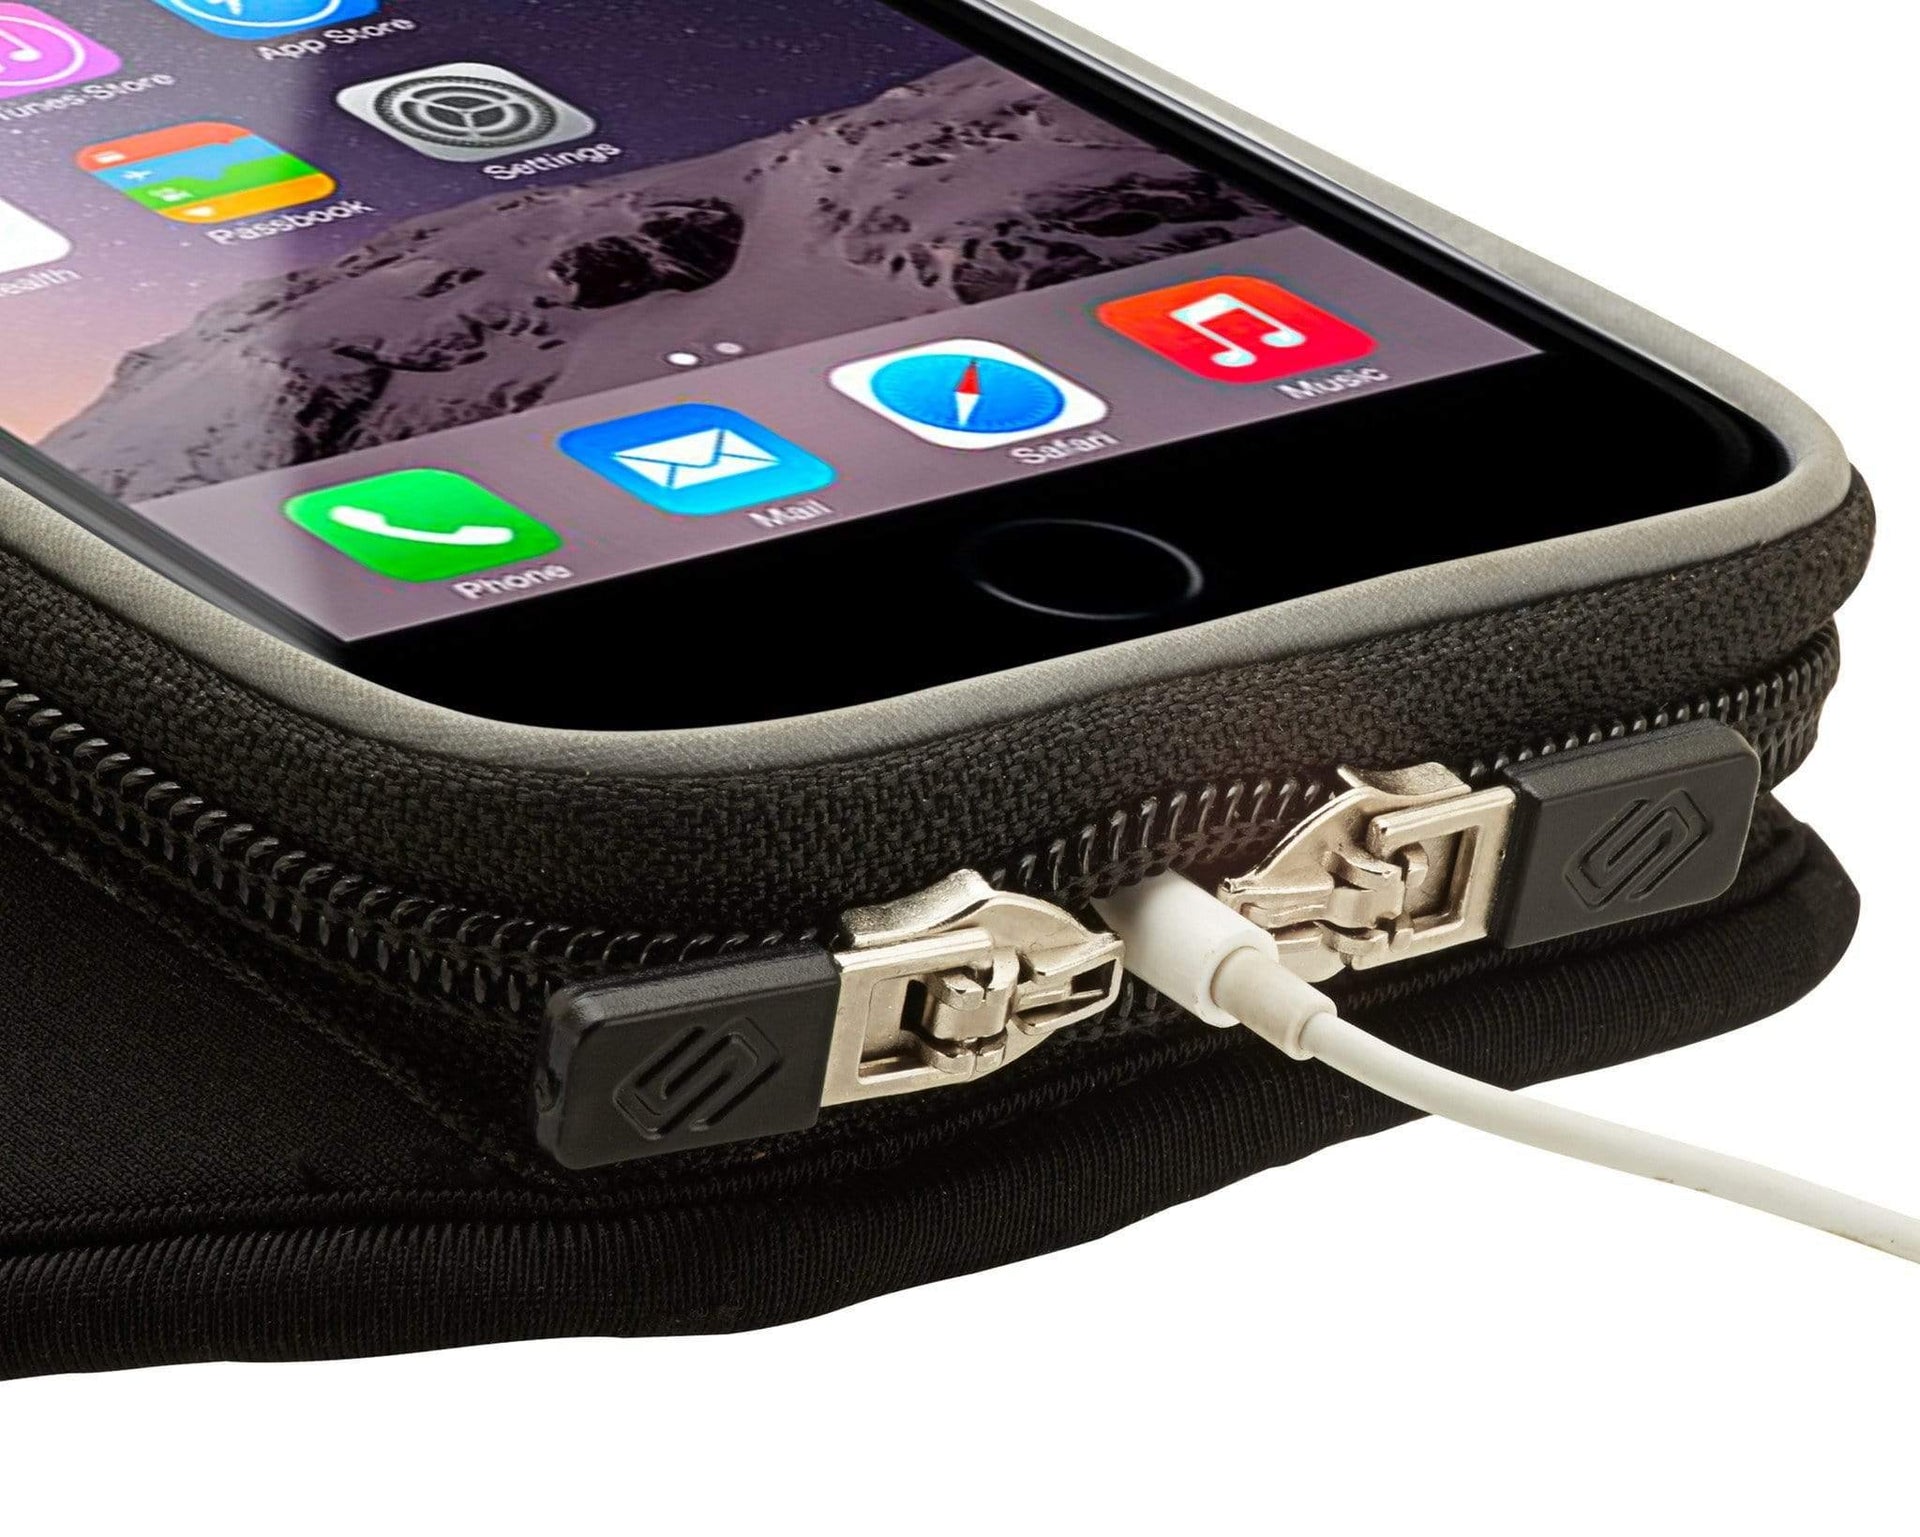 Sporteer Armband case for iPhone with opening for earbud cord